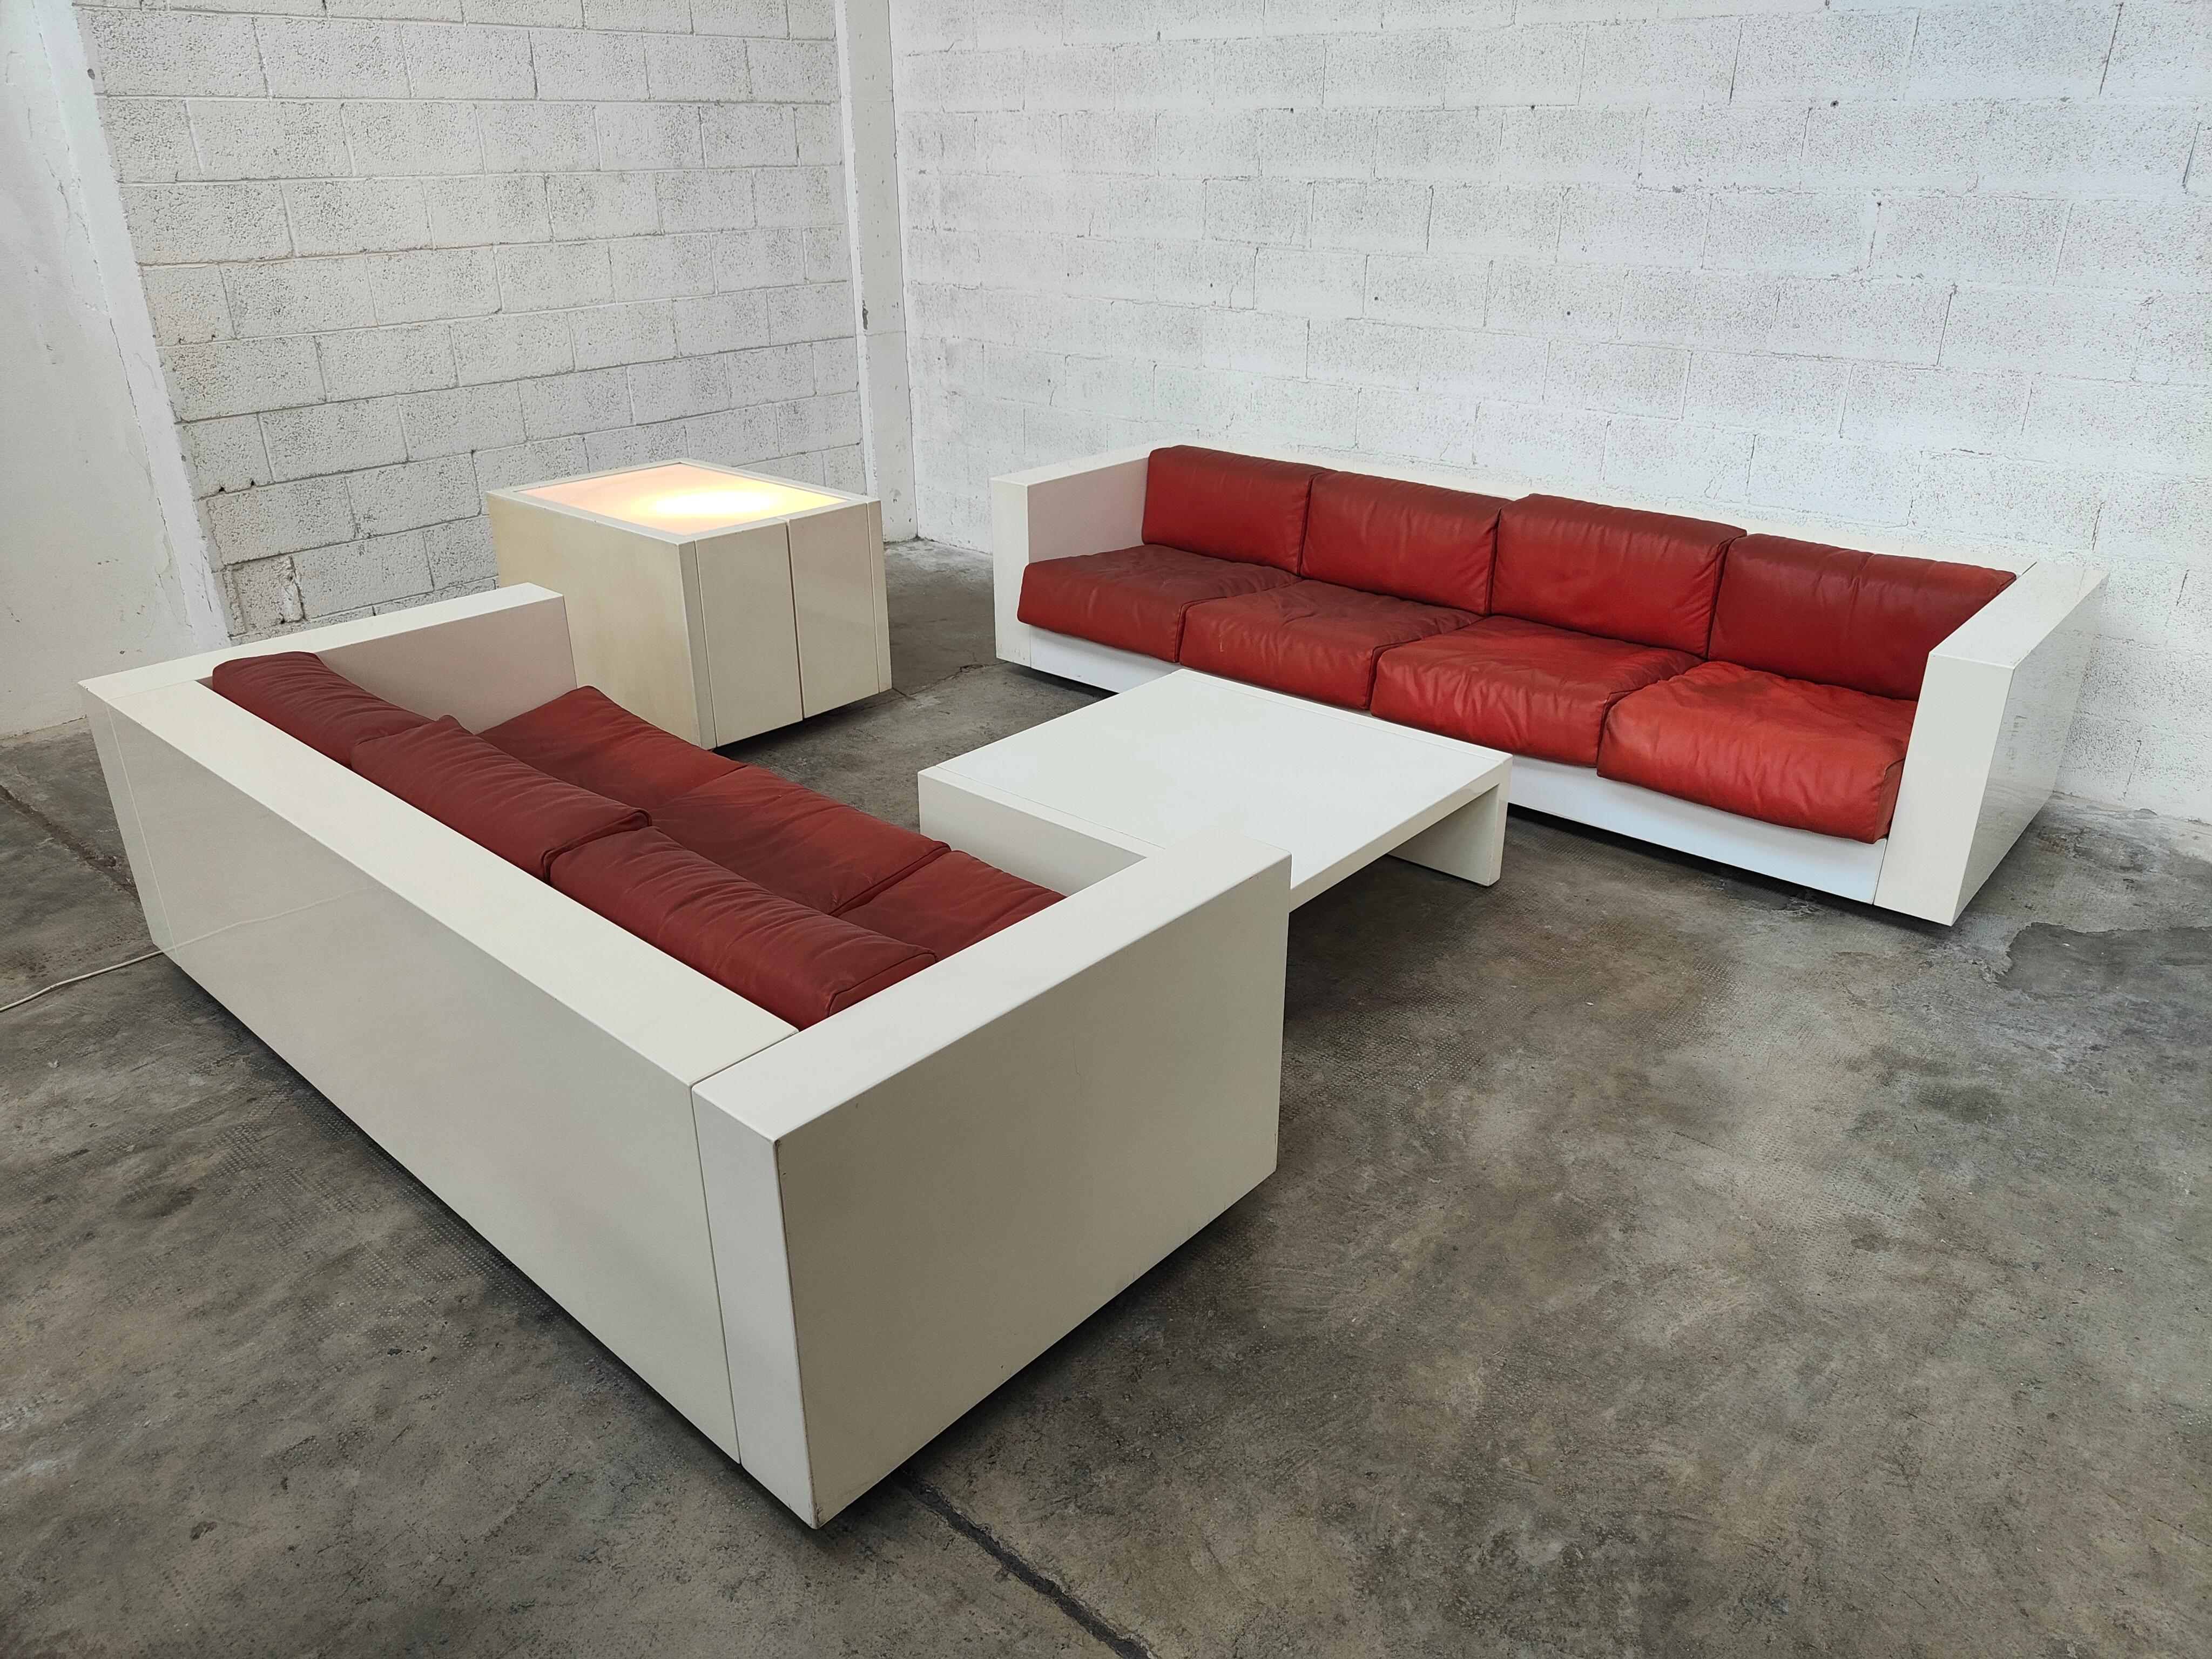 Exceptional Saratoga set designed by Massimo and Lella Vignella, produced by Poltronova, Italy 1960s.
A beautiful living room set composed of two sofas (three-seater/four-seater), a coffee table and ailluminated cabinet model Saratoga.
The sofas